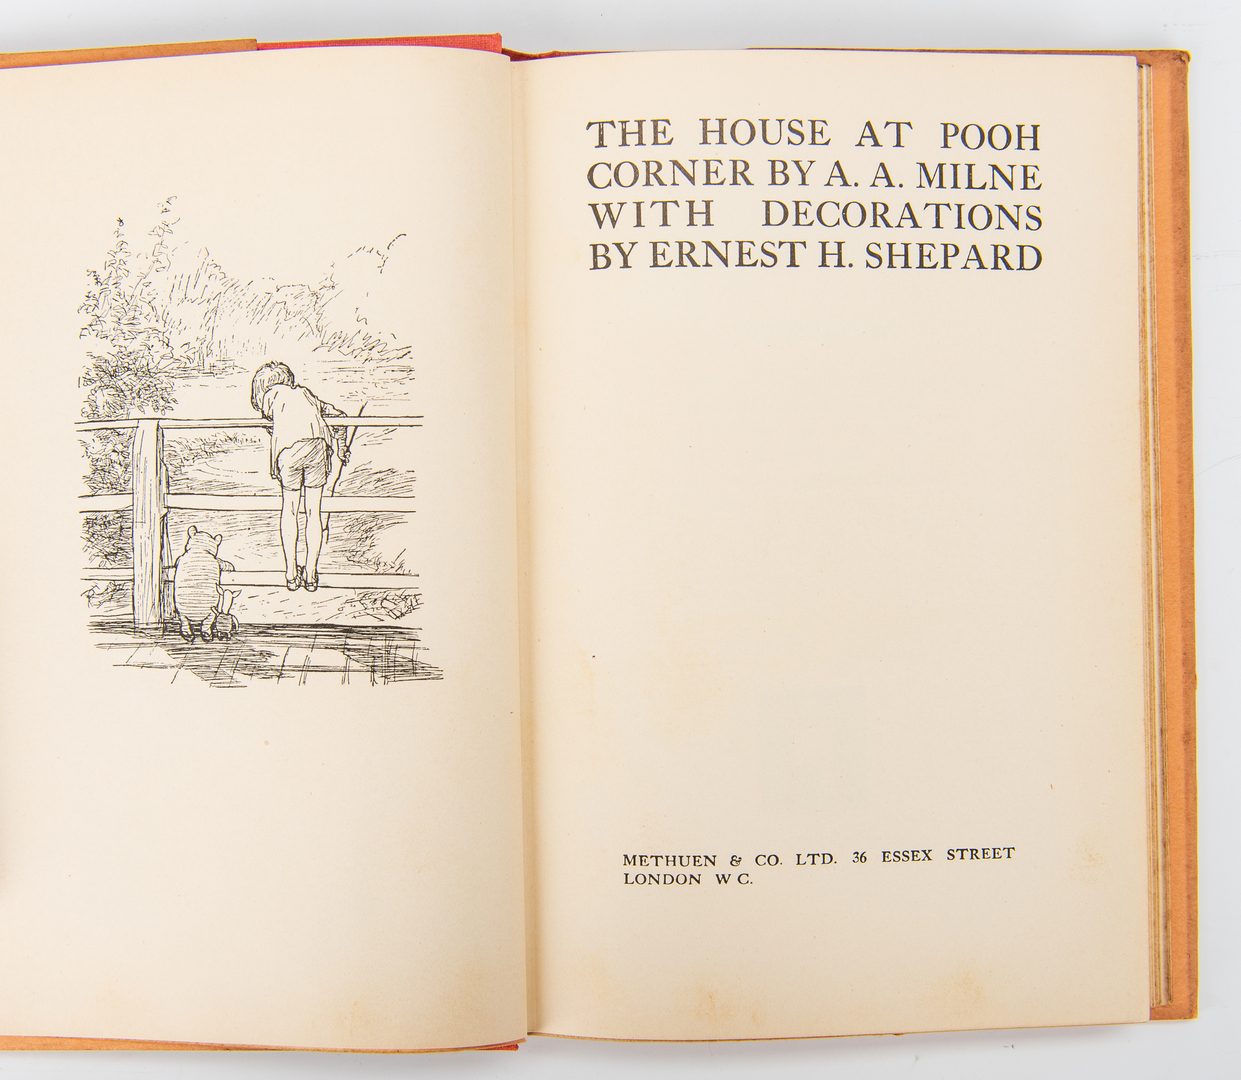 Lot 812: A. A. Milne, The House at Pooh Corner, 1st Ed.